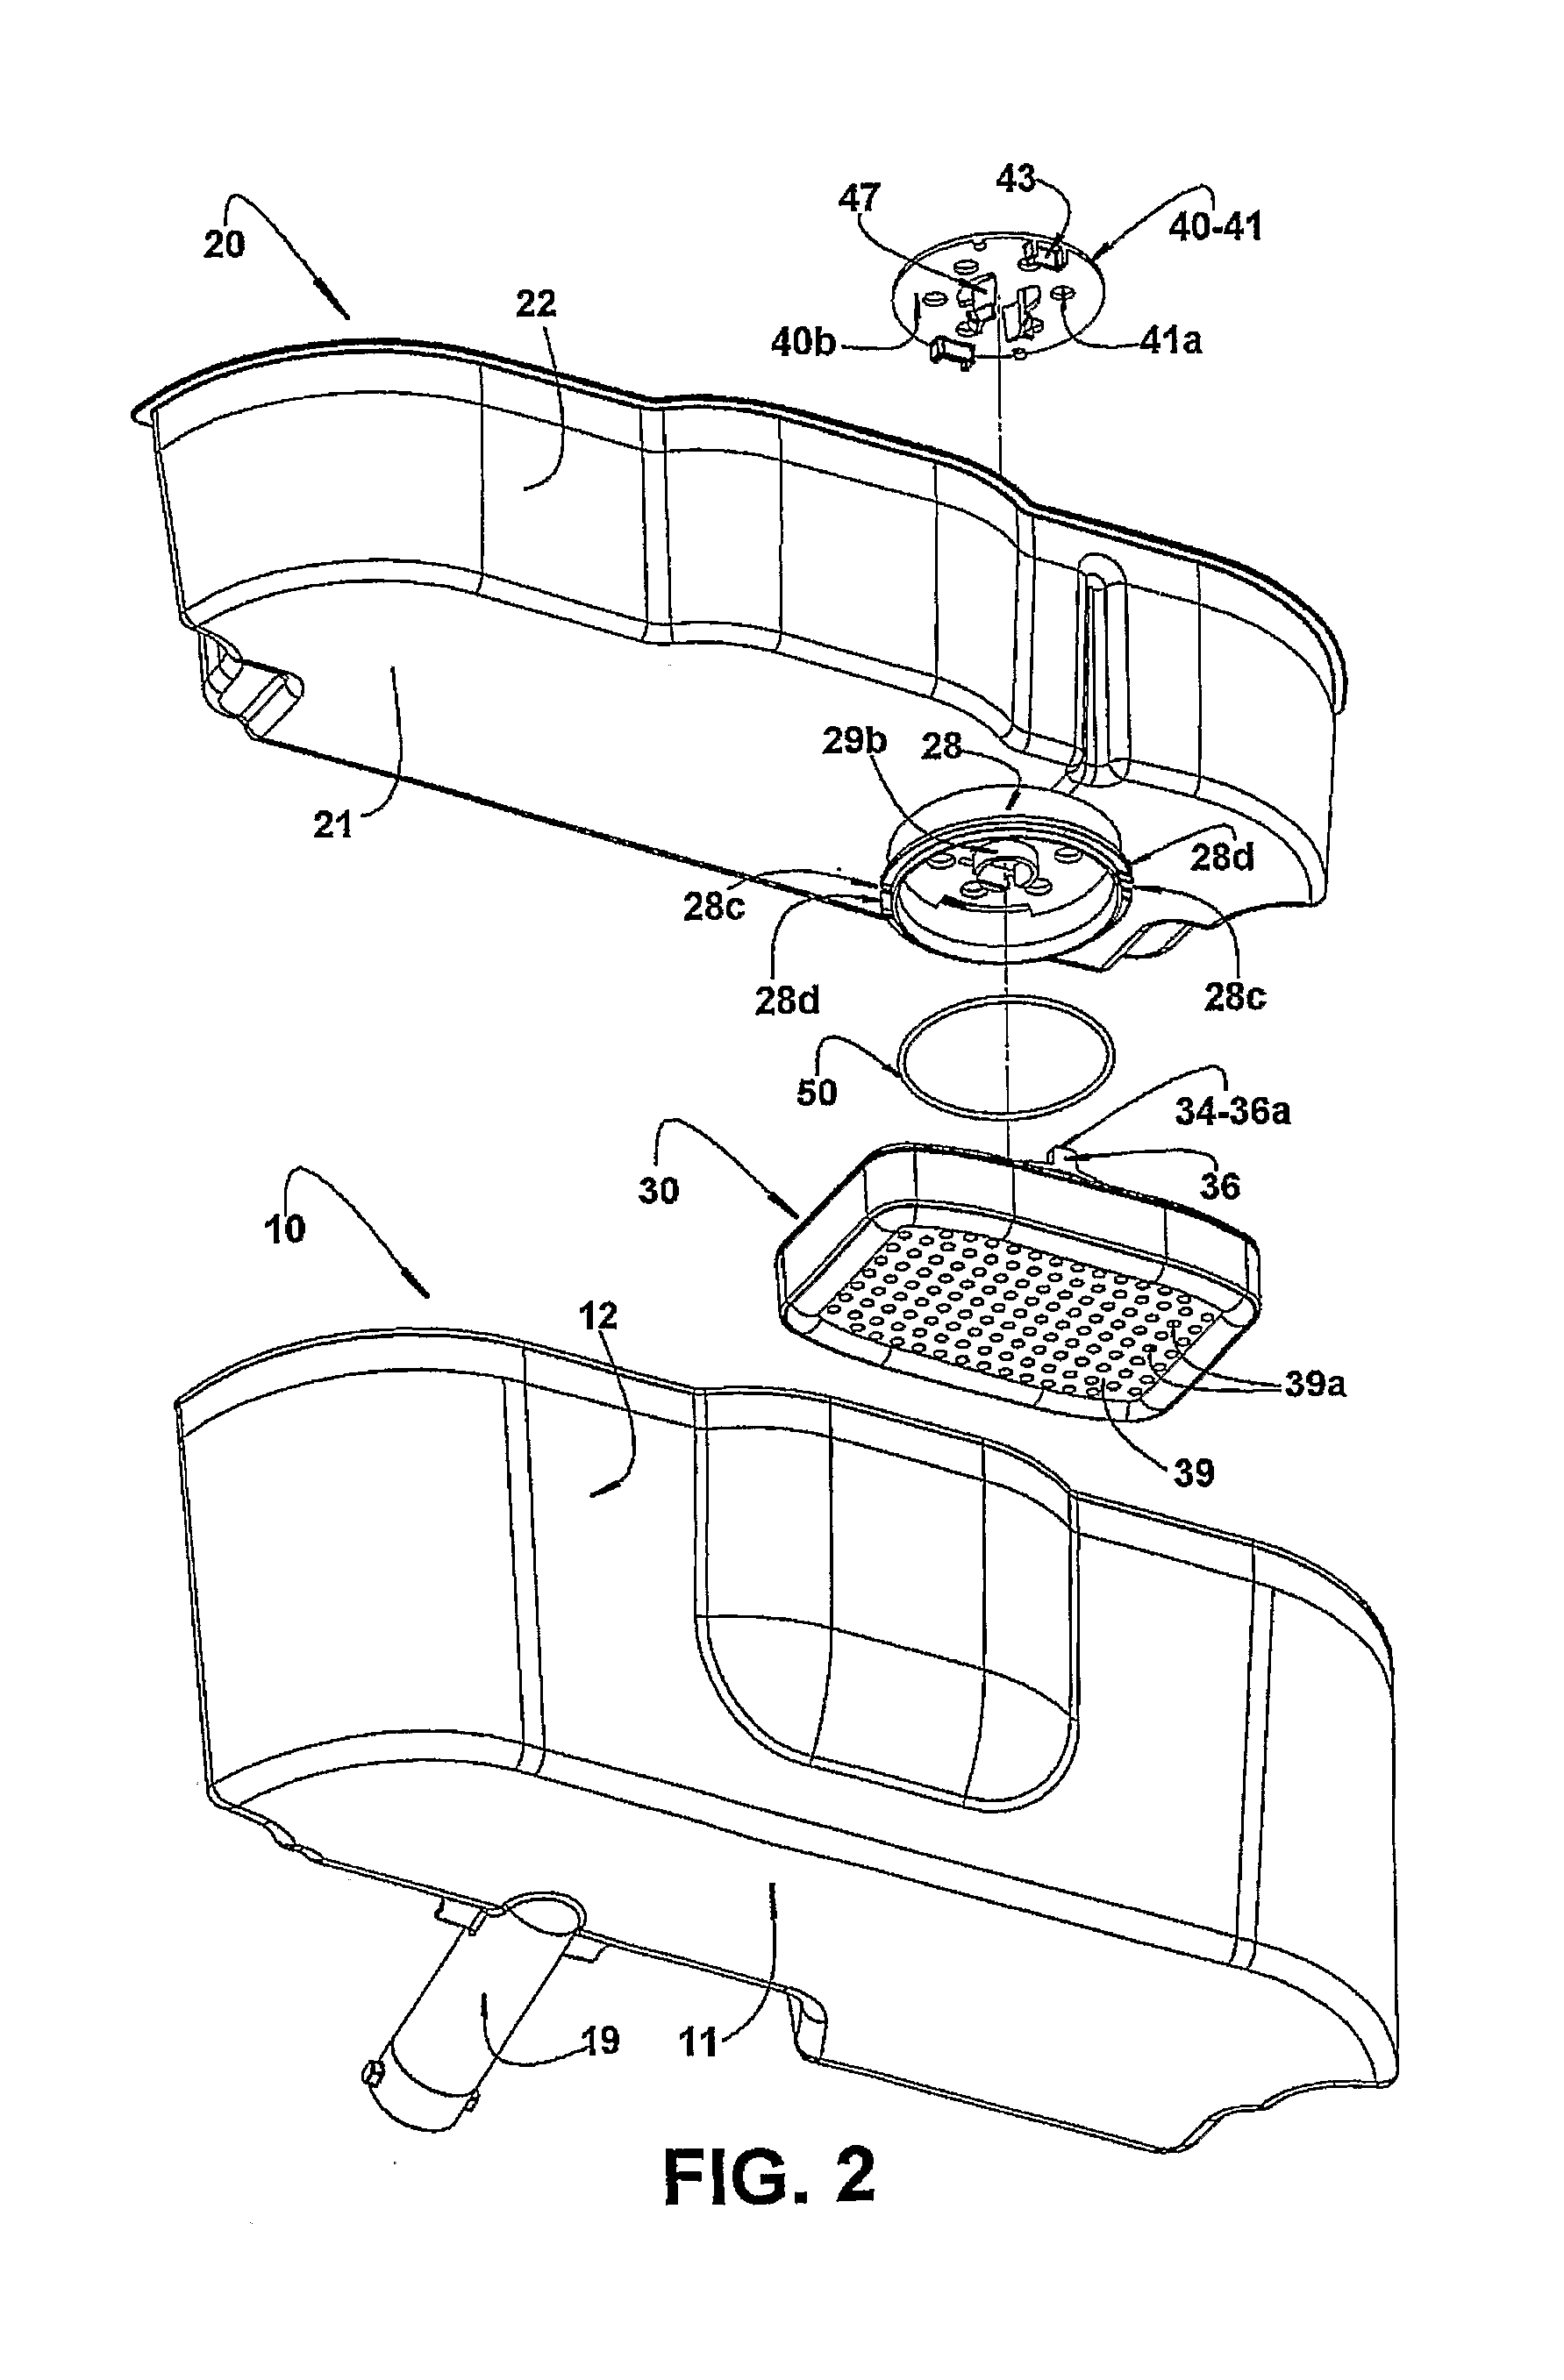 Arrangement of filter assembly for water dispensing-storage device